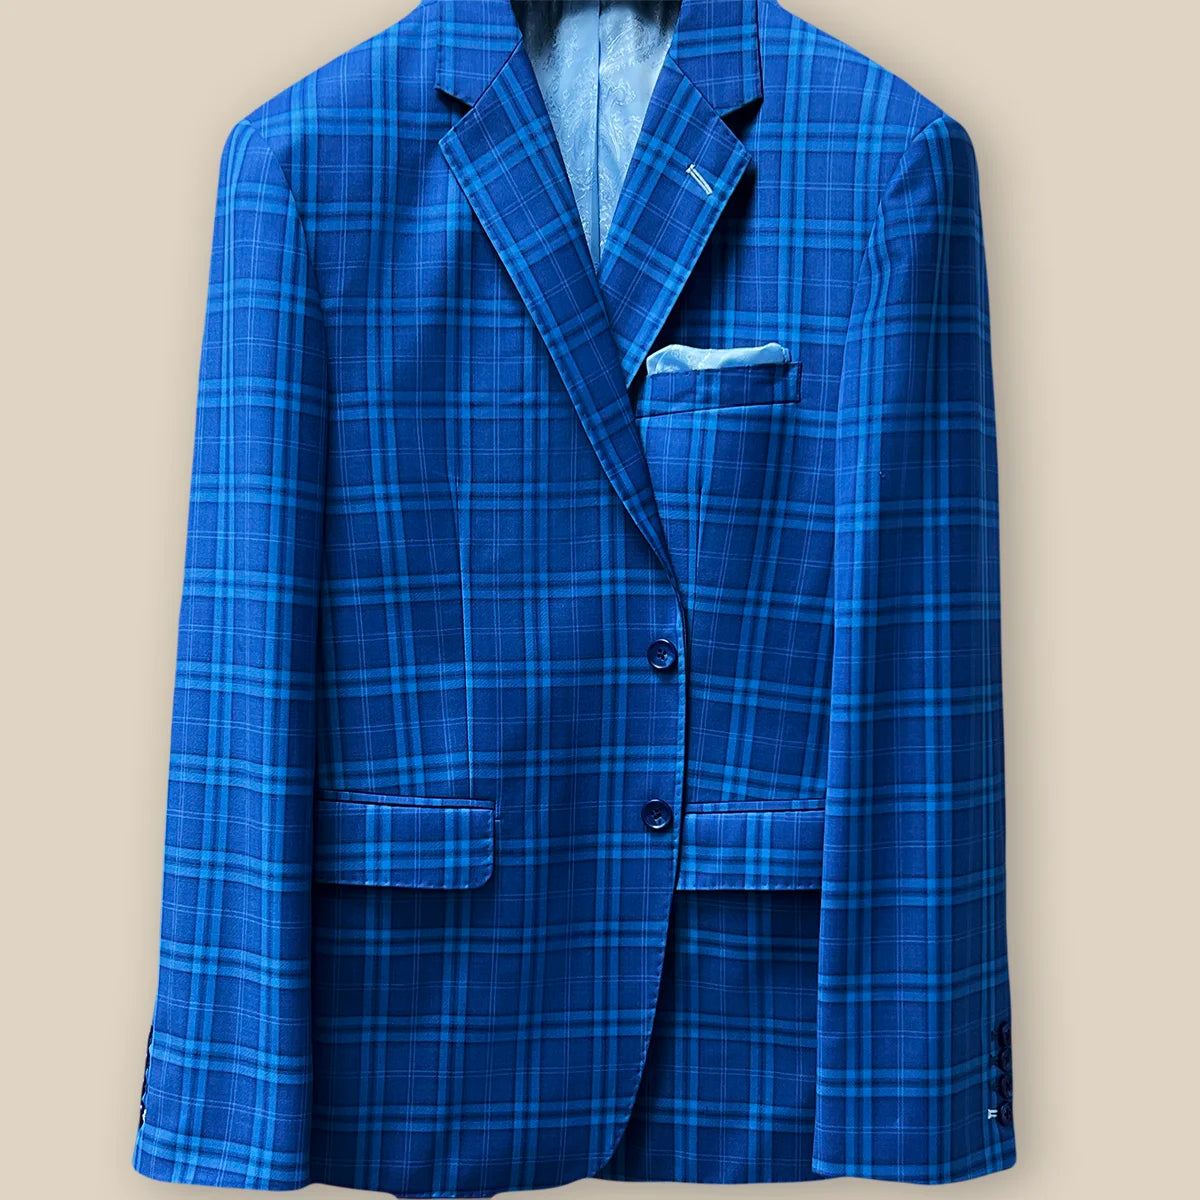 Button panel view presenting the fastening system of a colbalt blue checkered plaid men's sport coat.